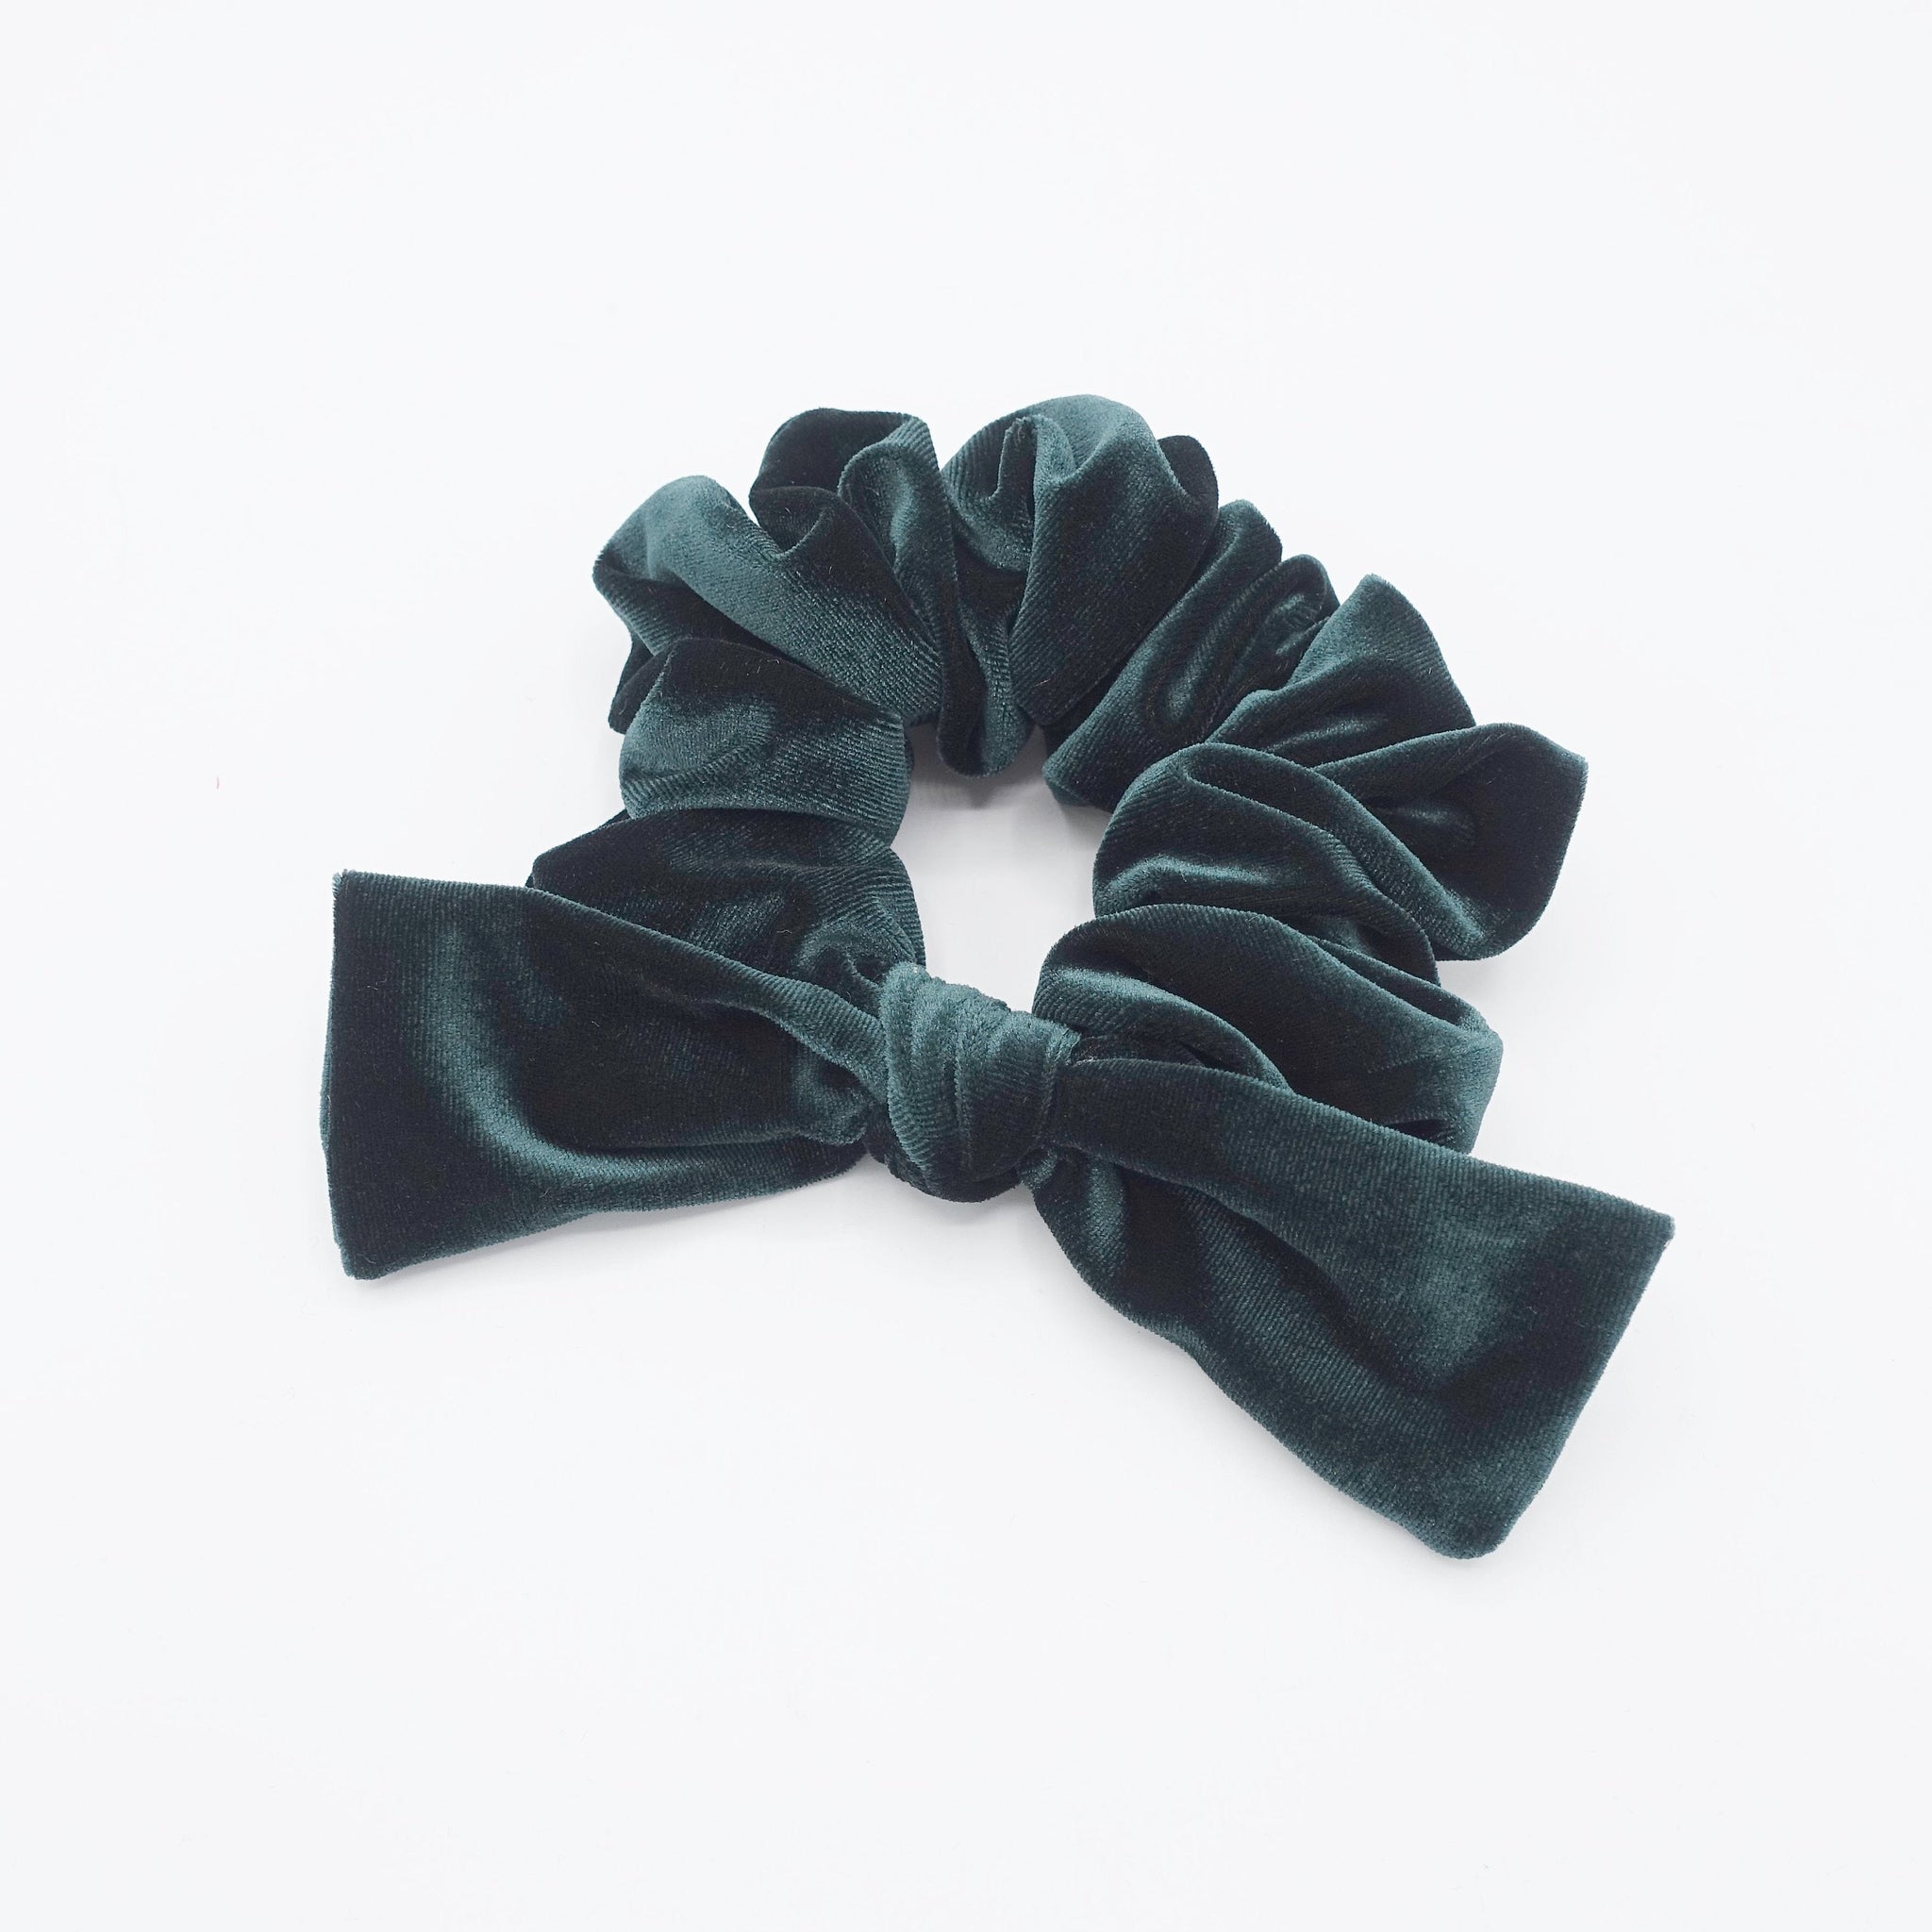 VeryShine Green thick velvet scrunchies colorful hair elastic scrunchie knot hair accessory for women